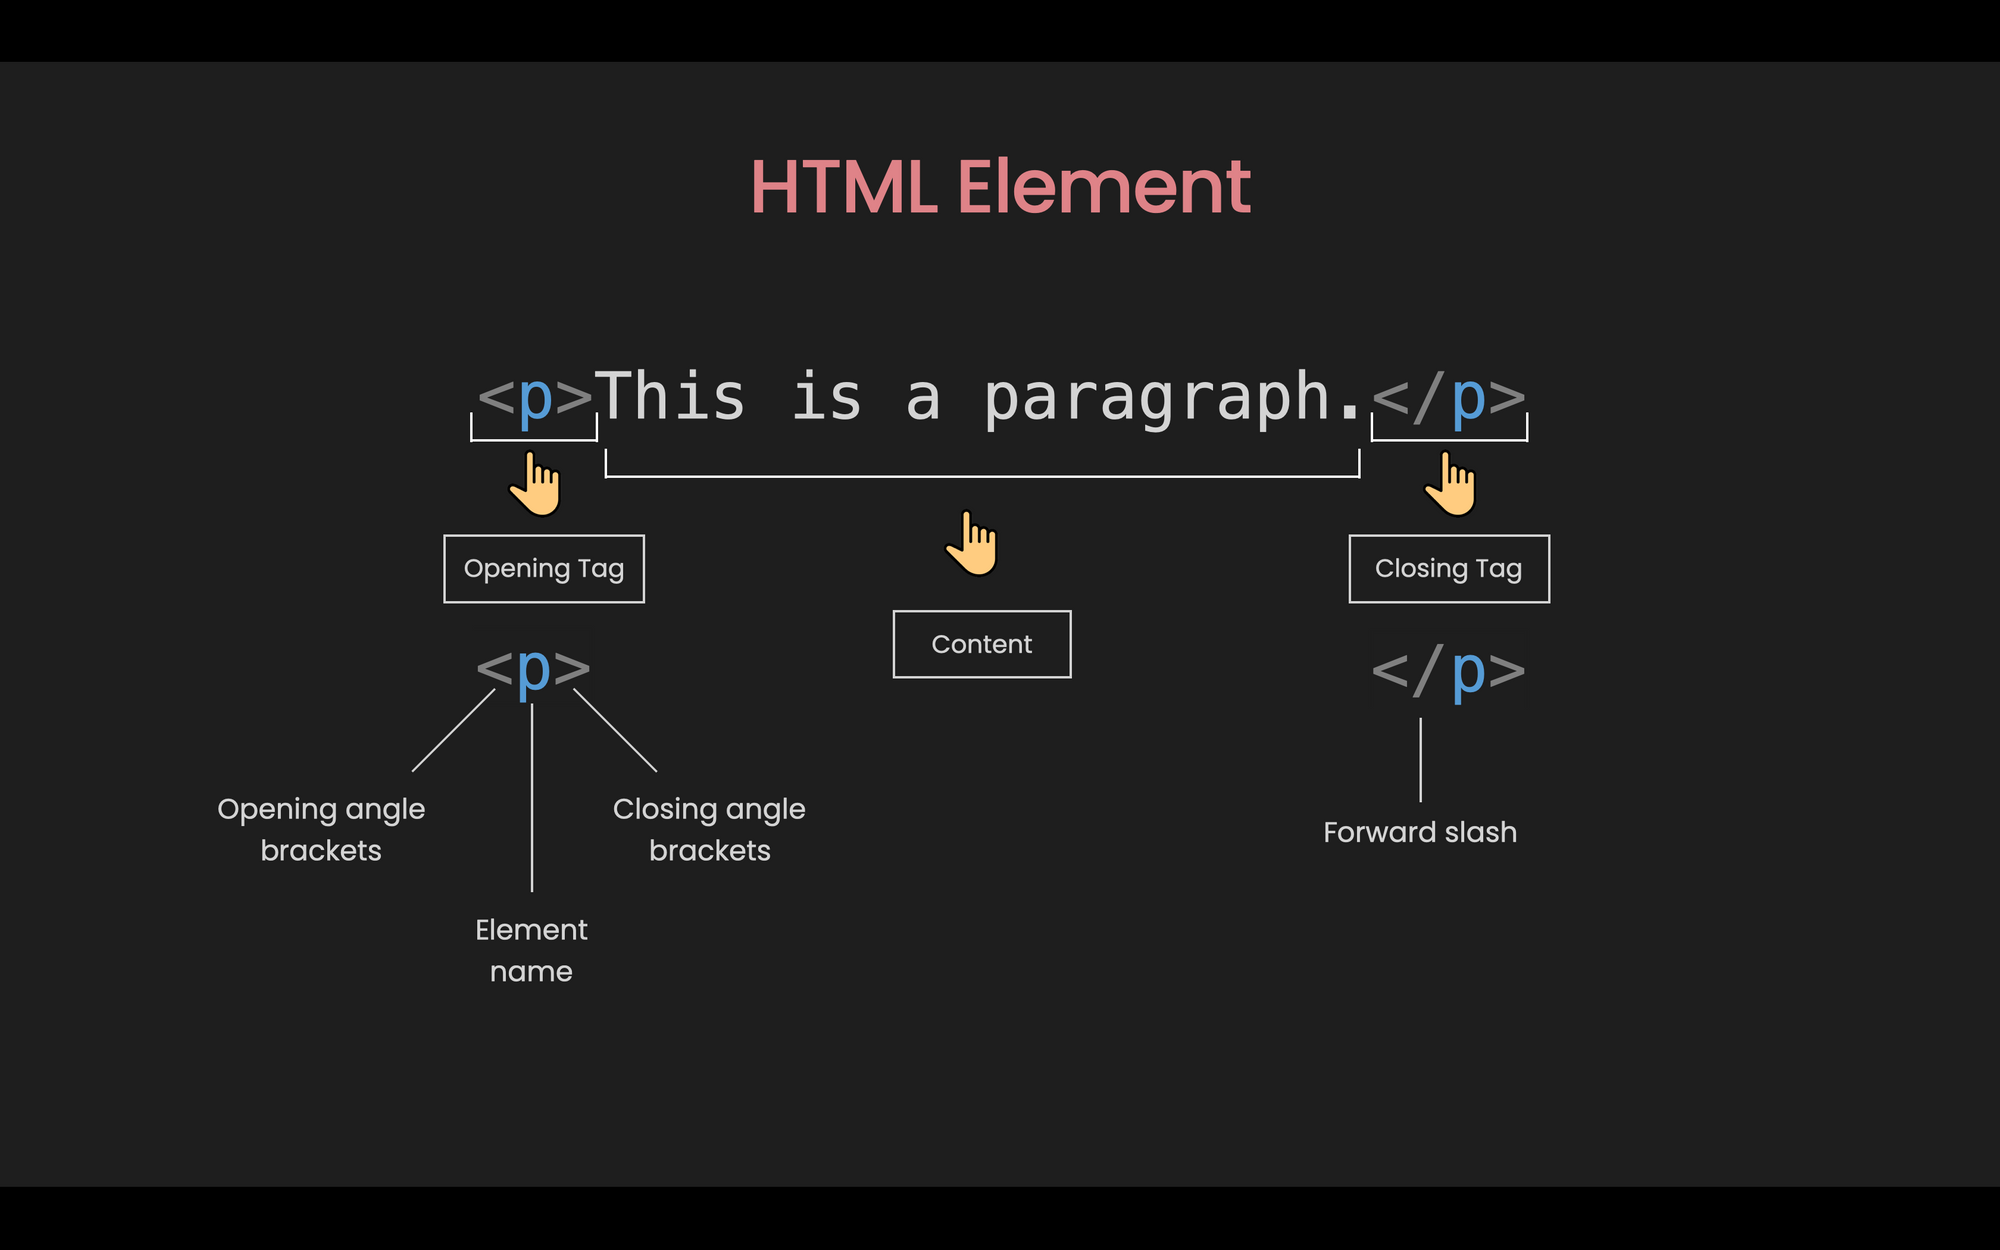 Elements of HTML